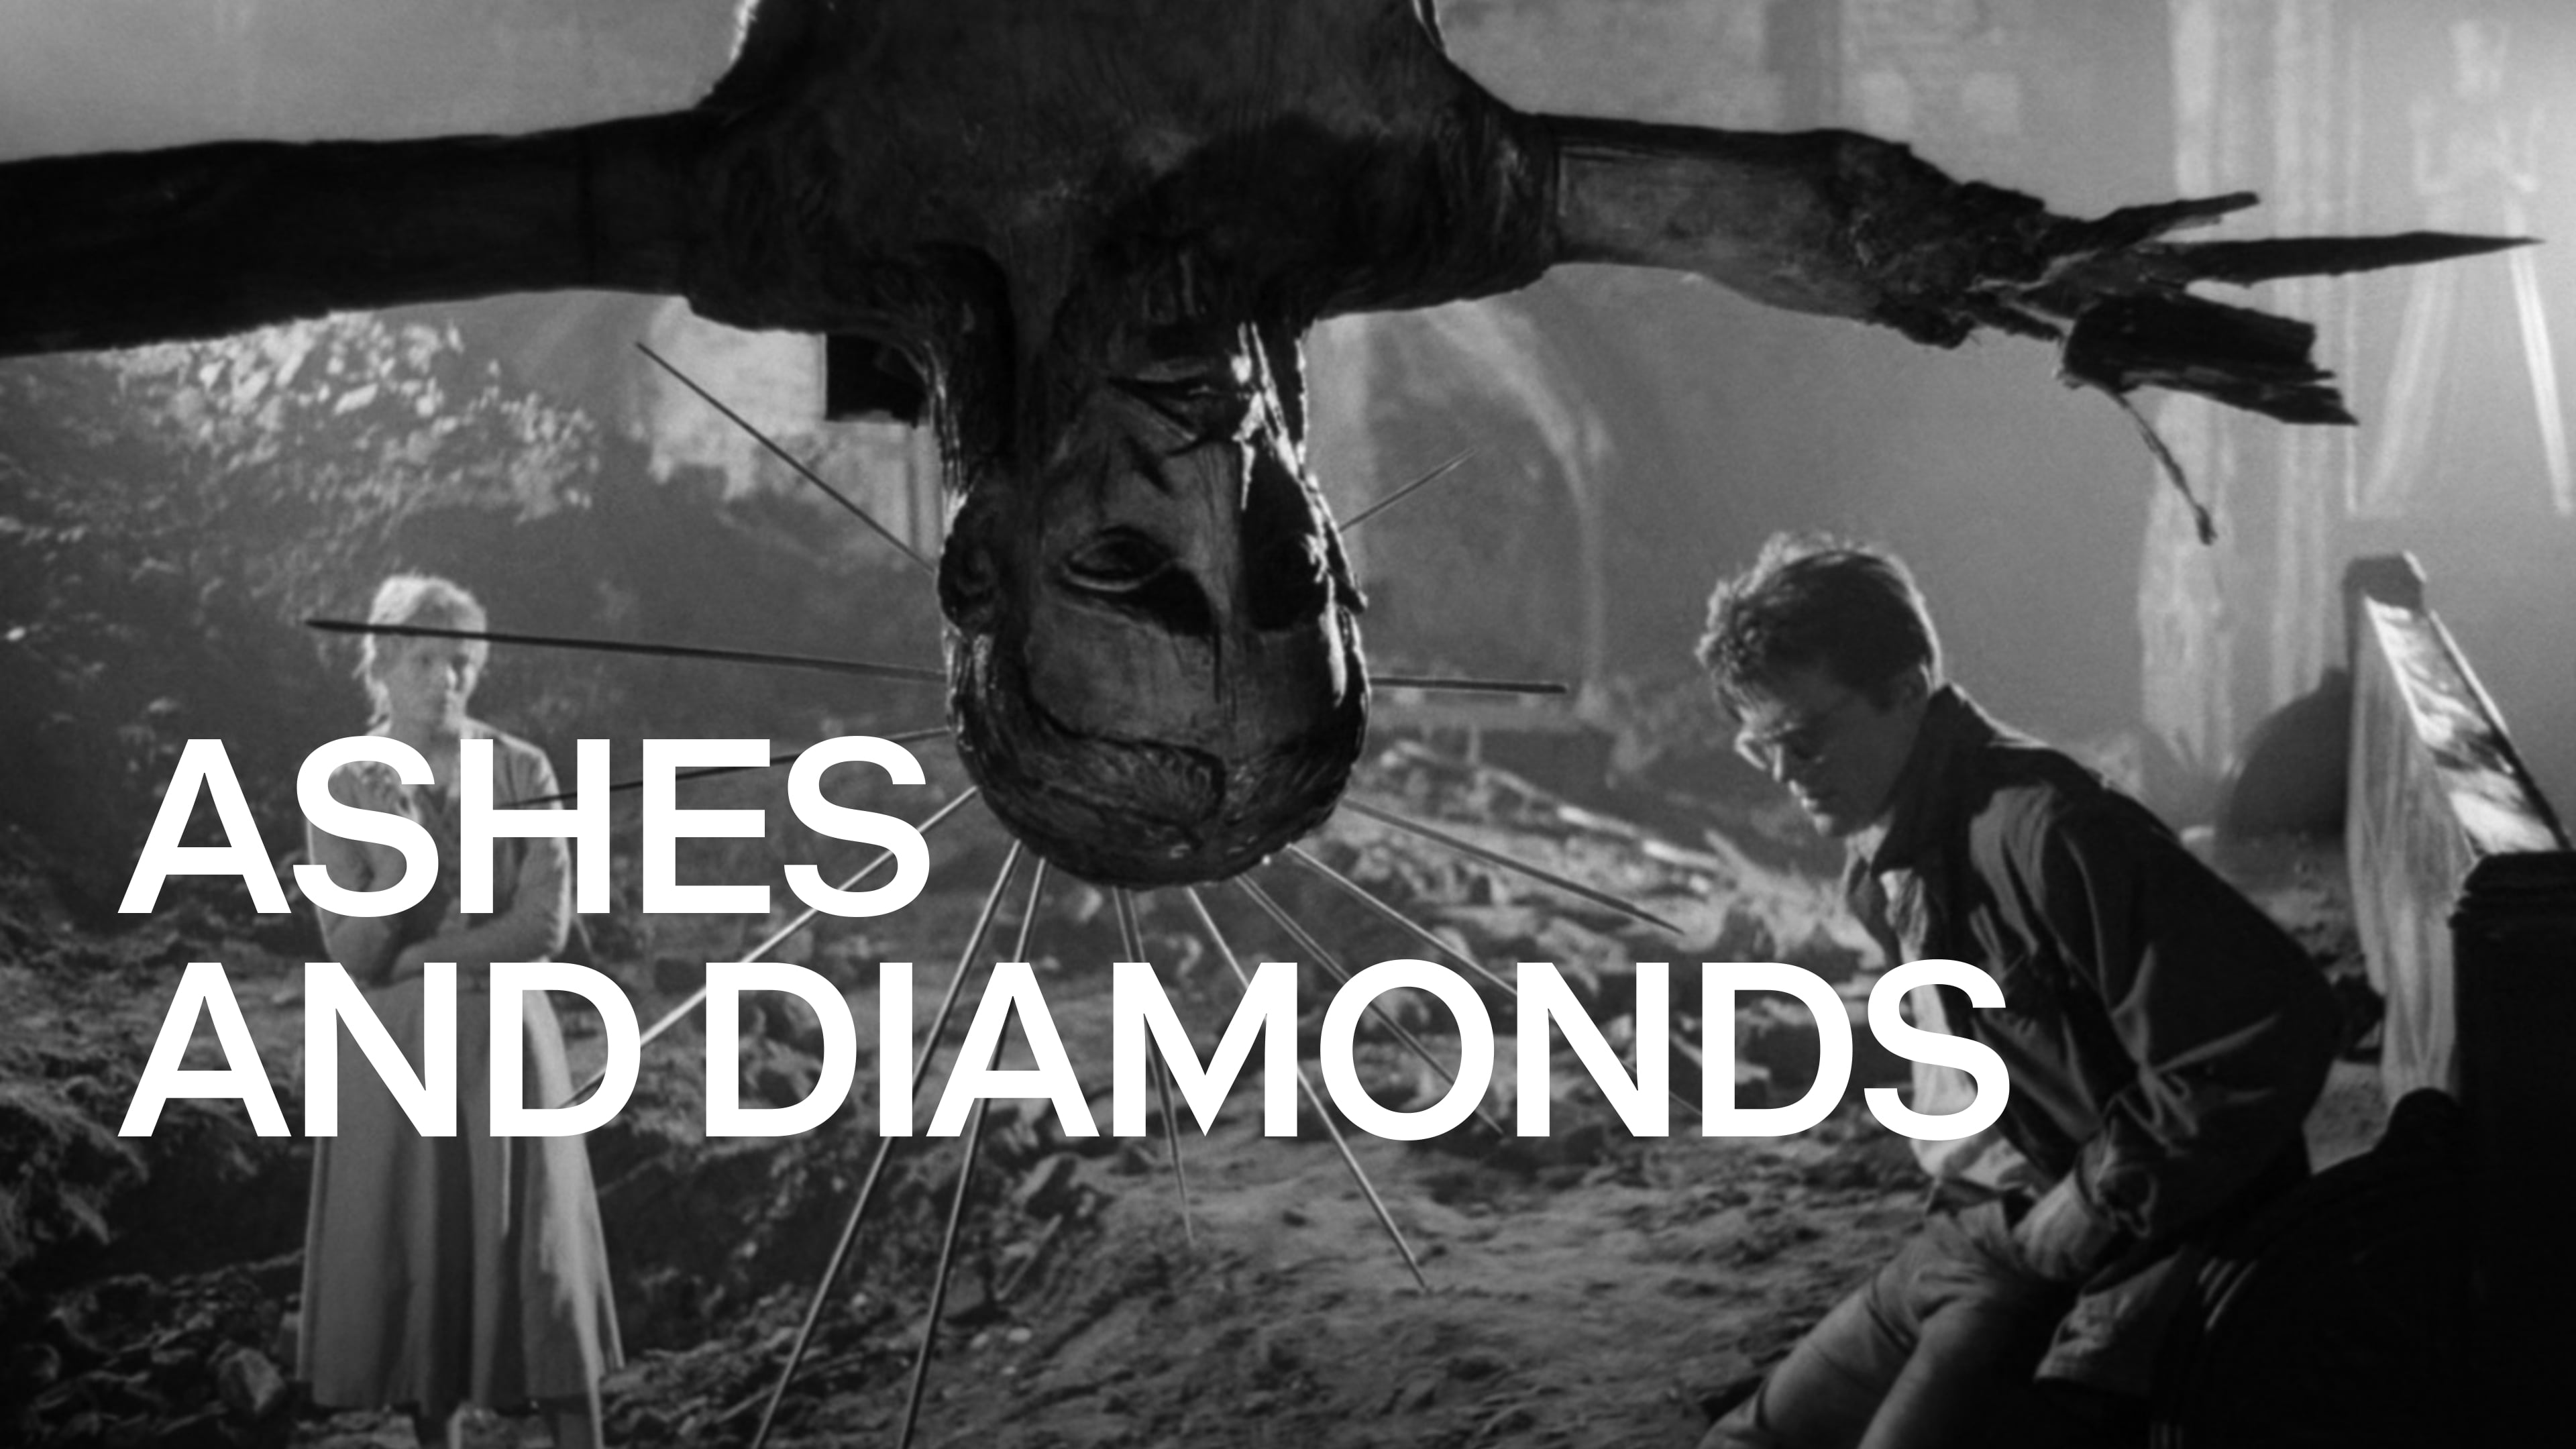 36-facts-about-the-movie-ashes-and-diamonds